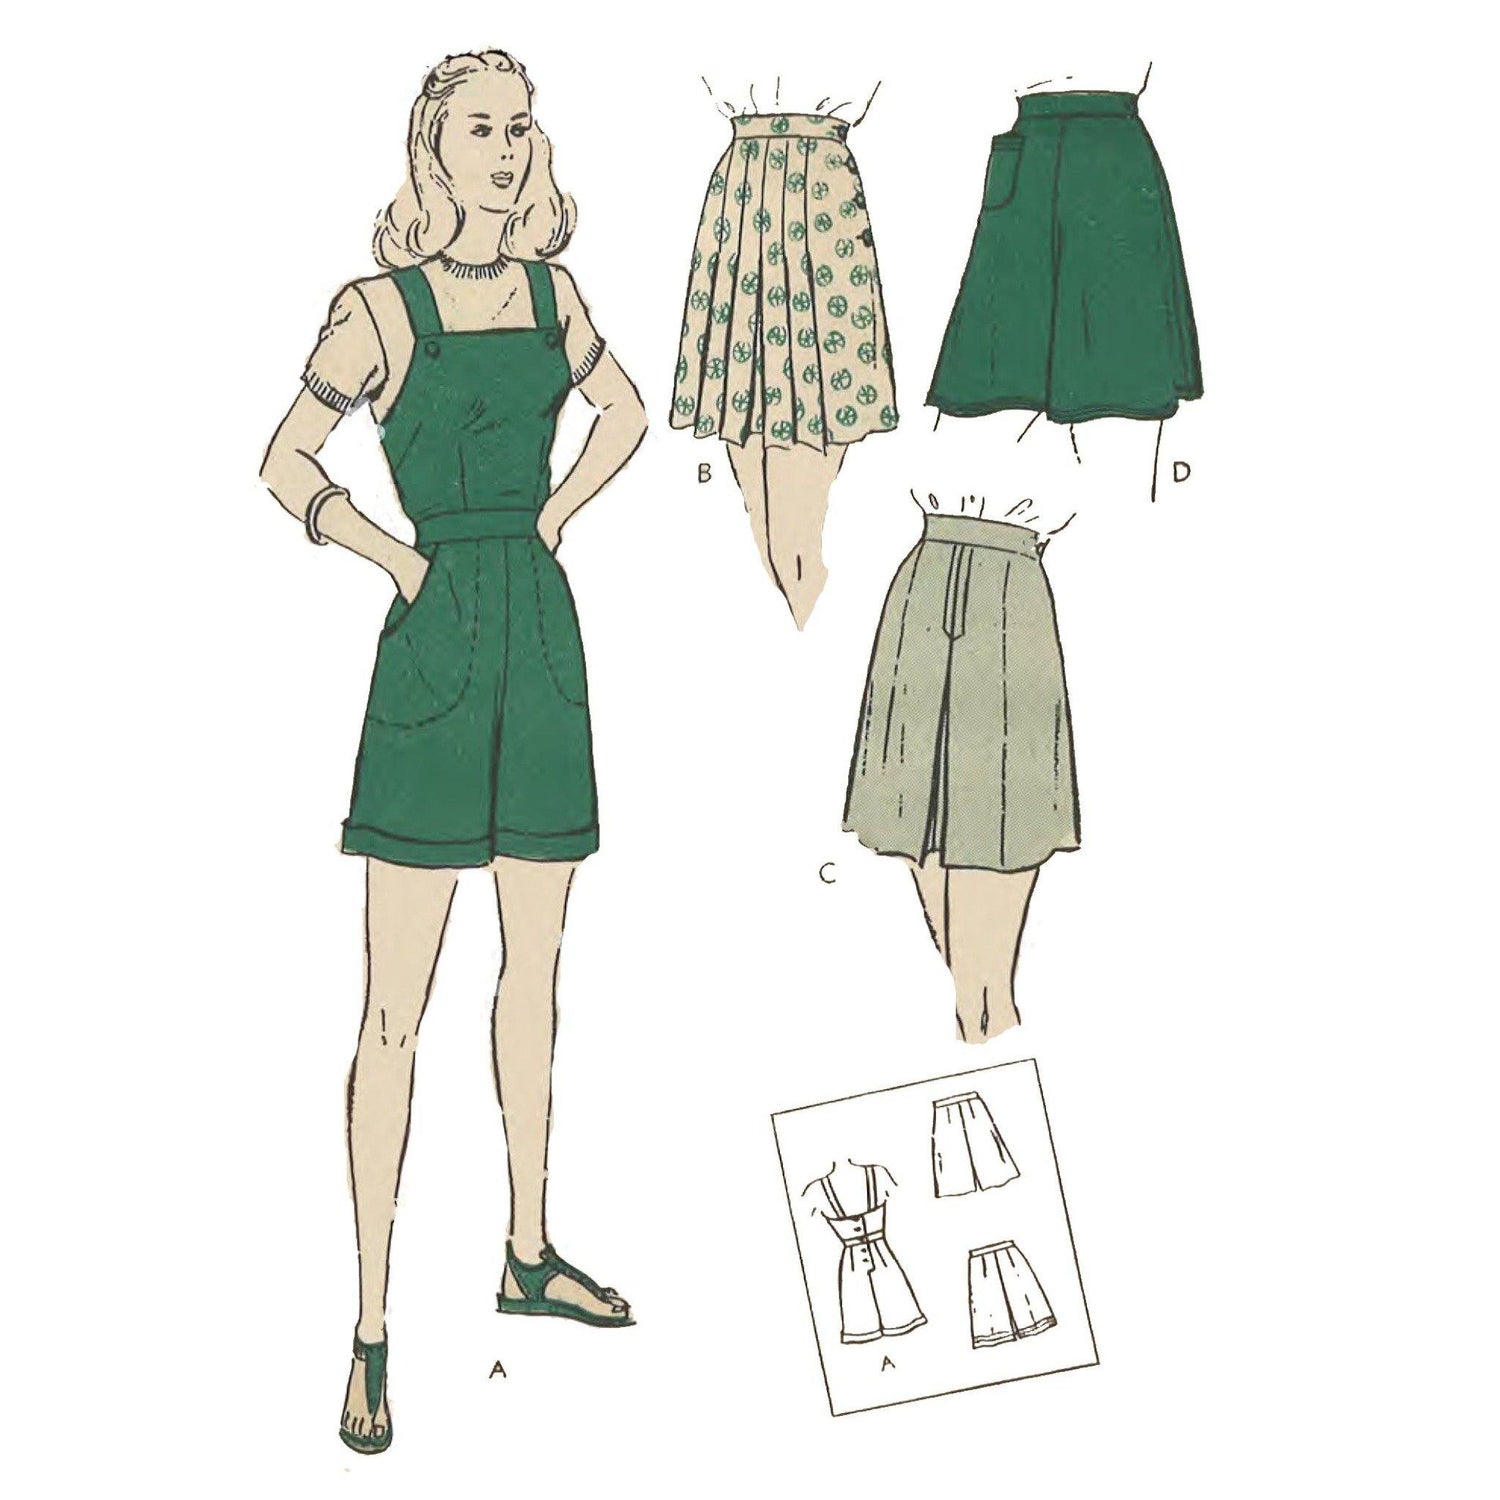 Vintage sewing pattern illustration of differnt views of shorts